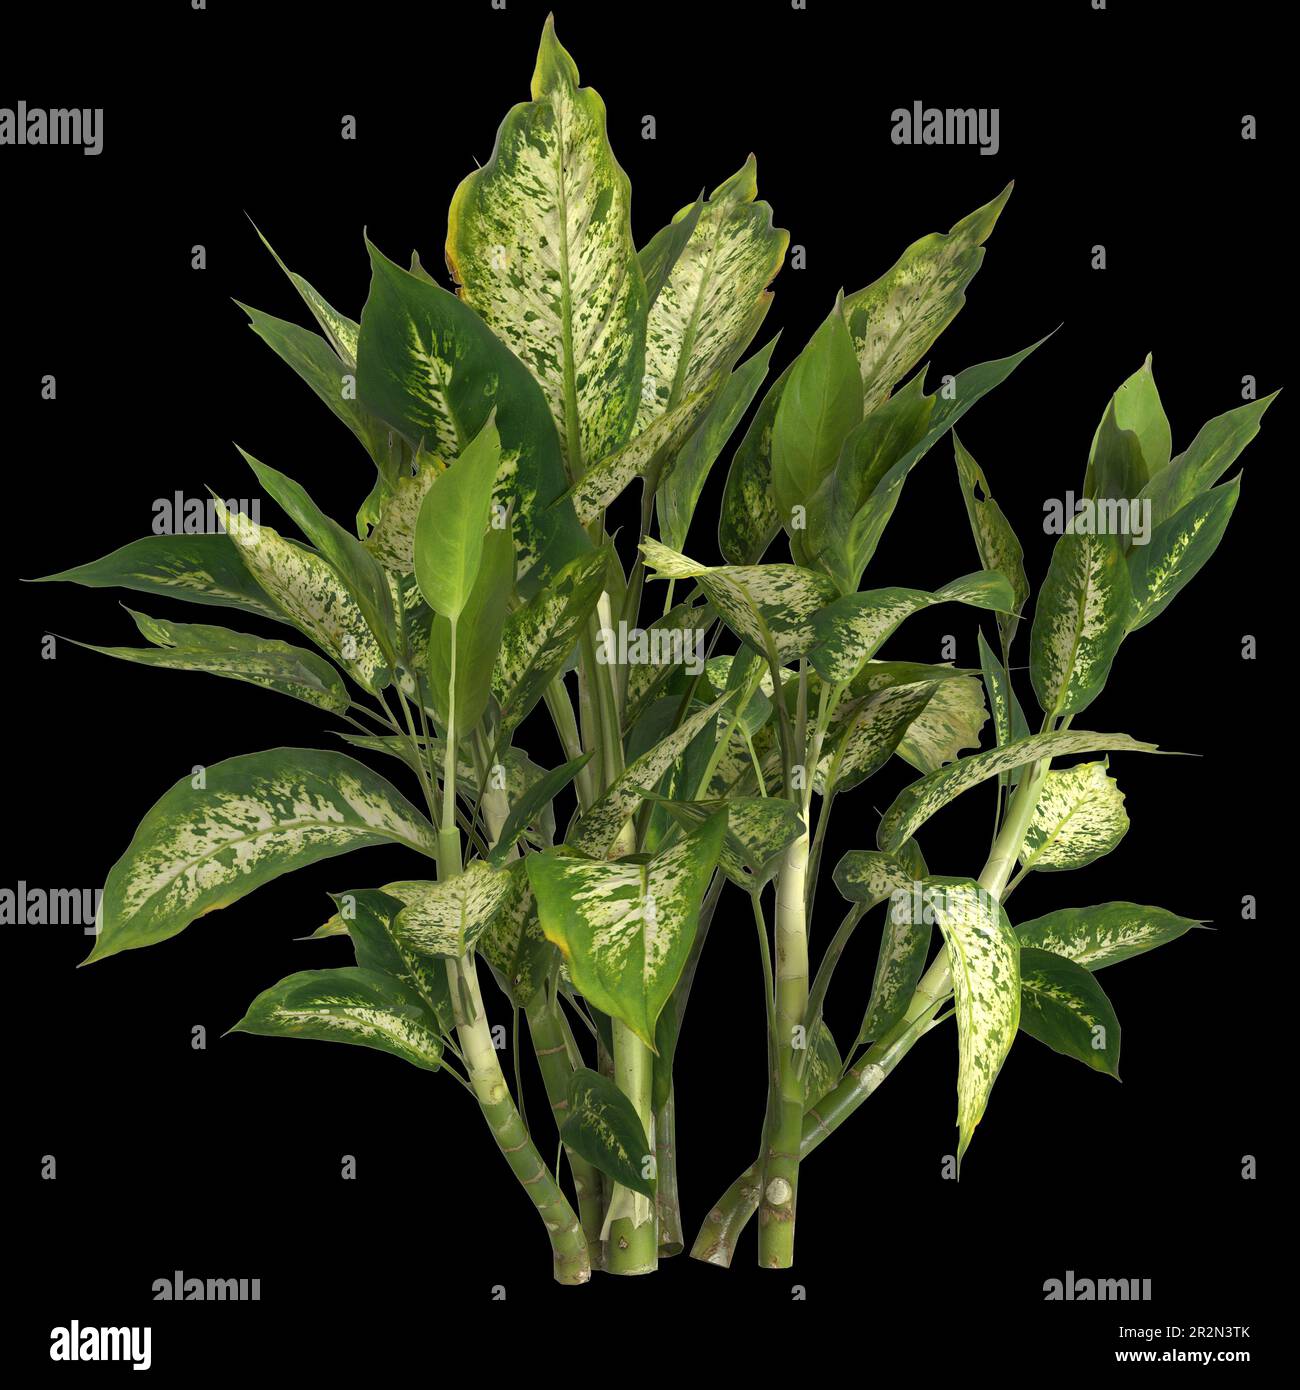 3d illustration of dieffenbachia maculata plant isolated on black background Stock Photo